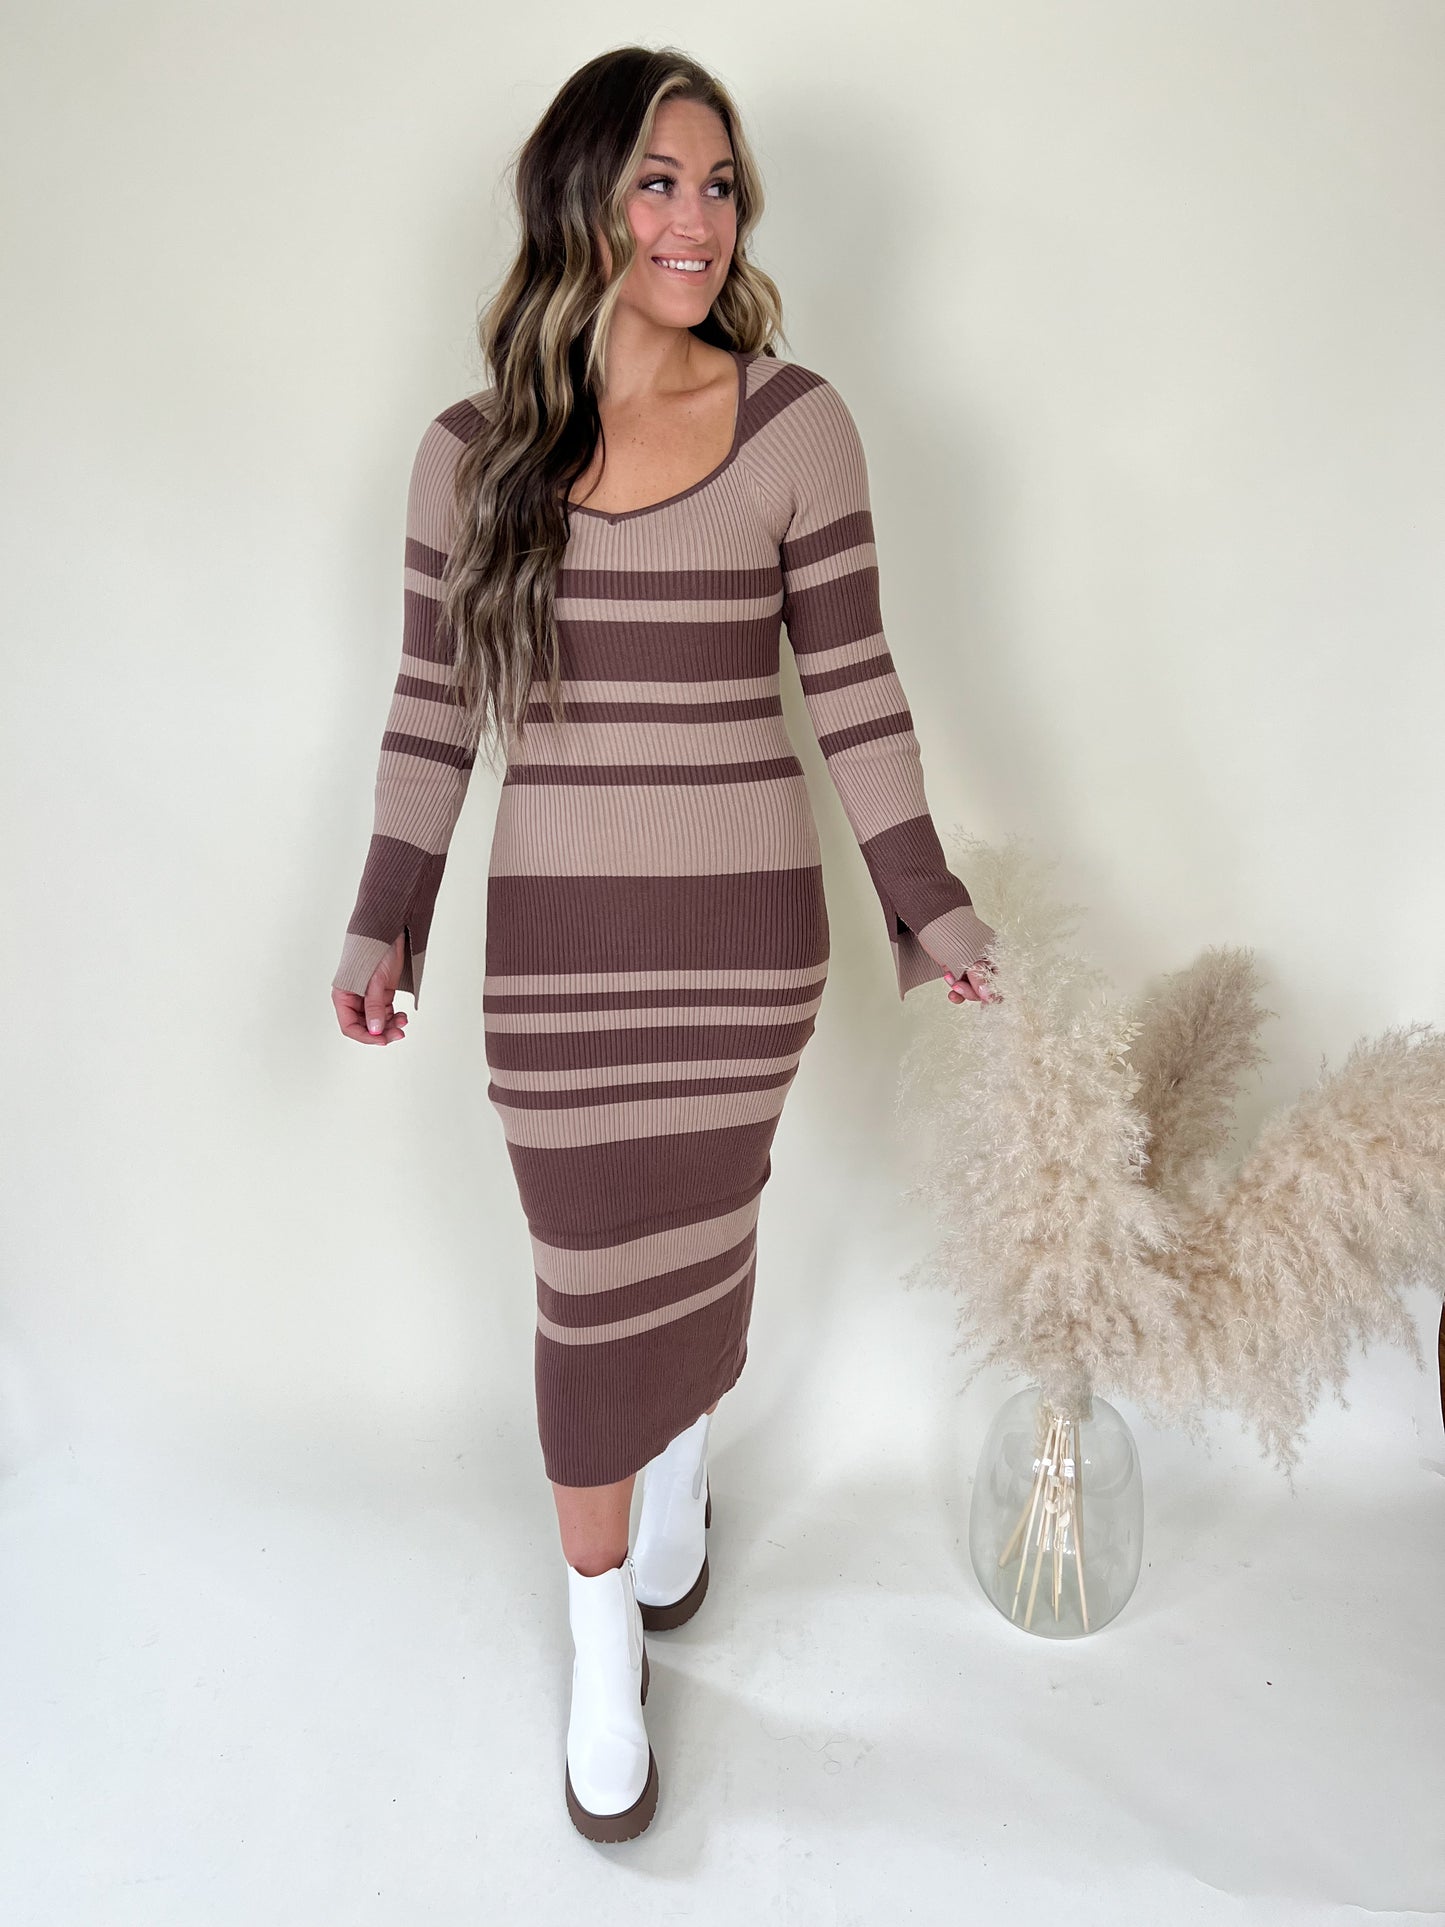 Simply Chic Sweater Dress FINAL SALE